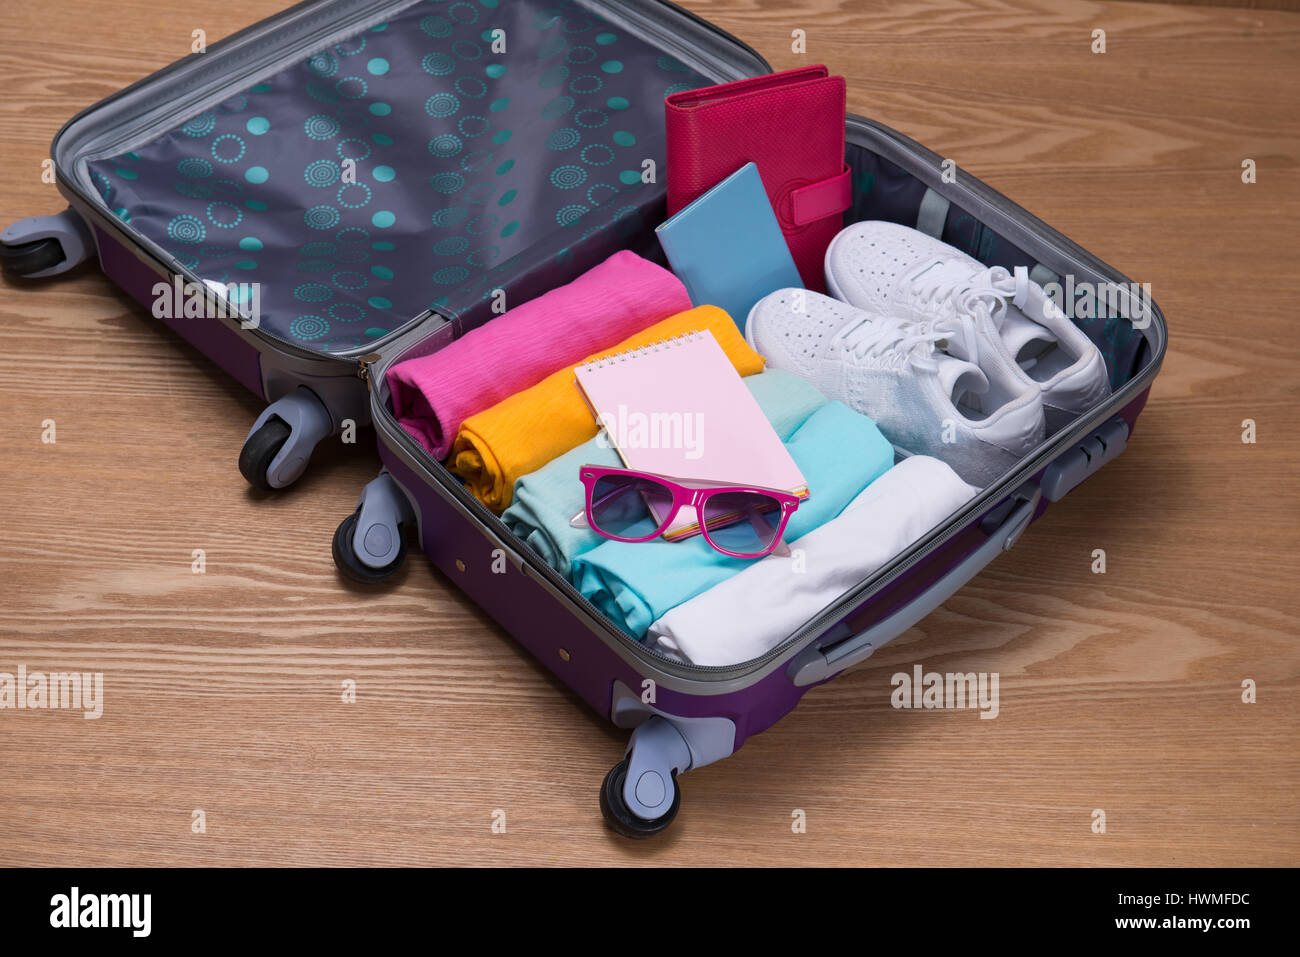 Travel and vacations concept. Open traveler's bag with clothing, accessories, credit card, tickets and passport. Stock Photo